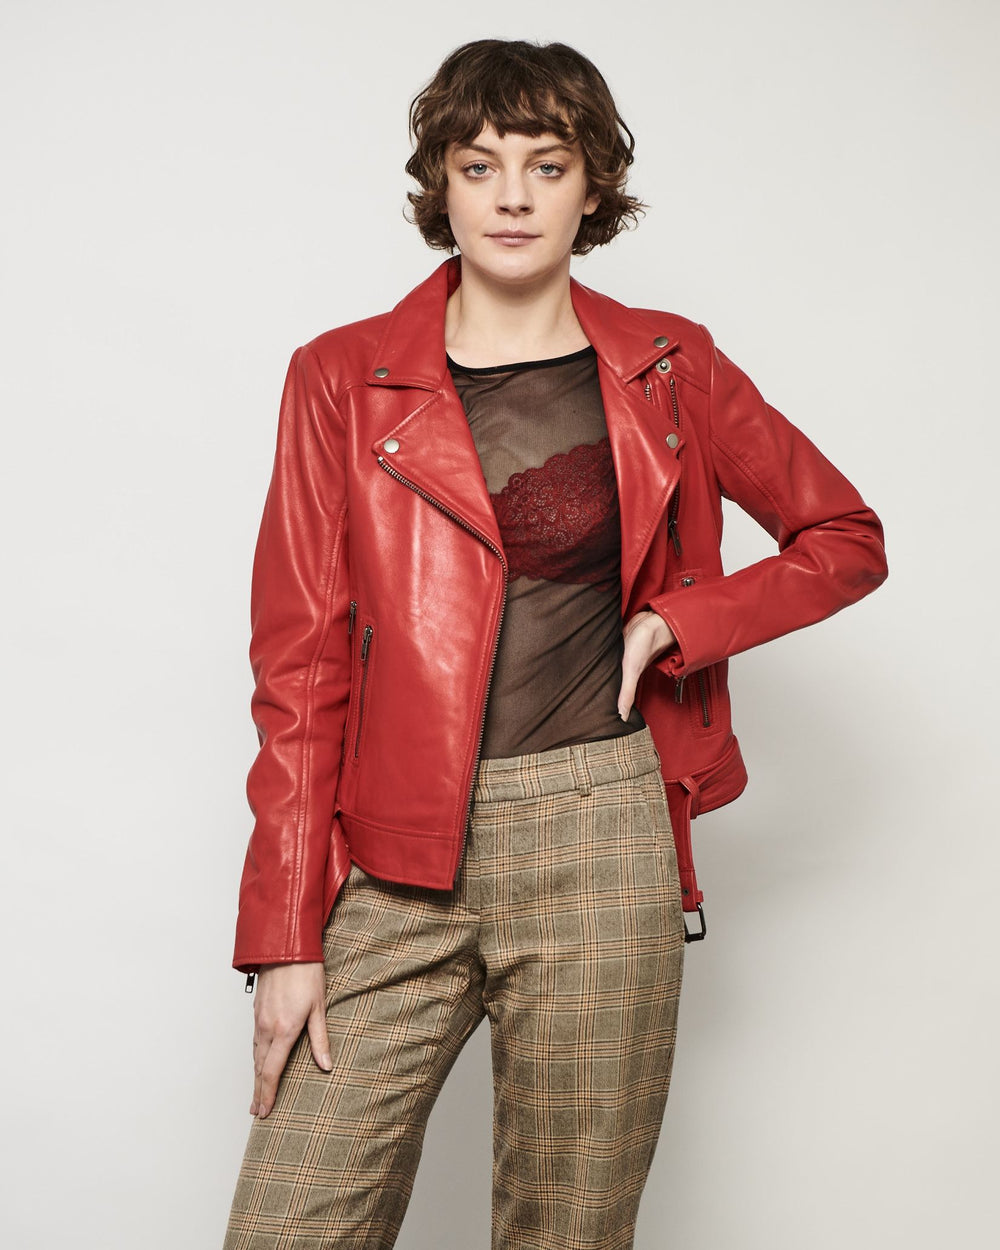 MODERN VICE DOUBLE ZIP MOTO JACKET in CANDY RED